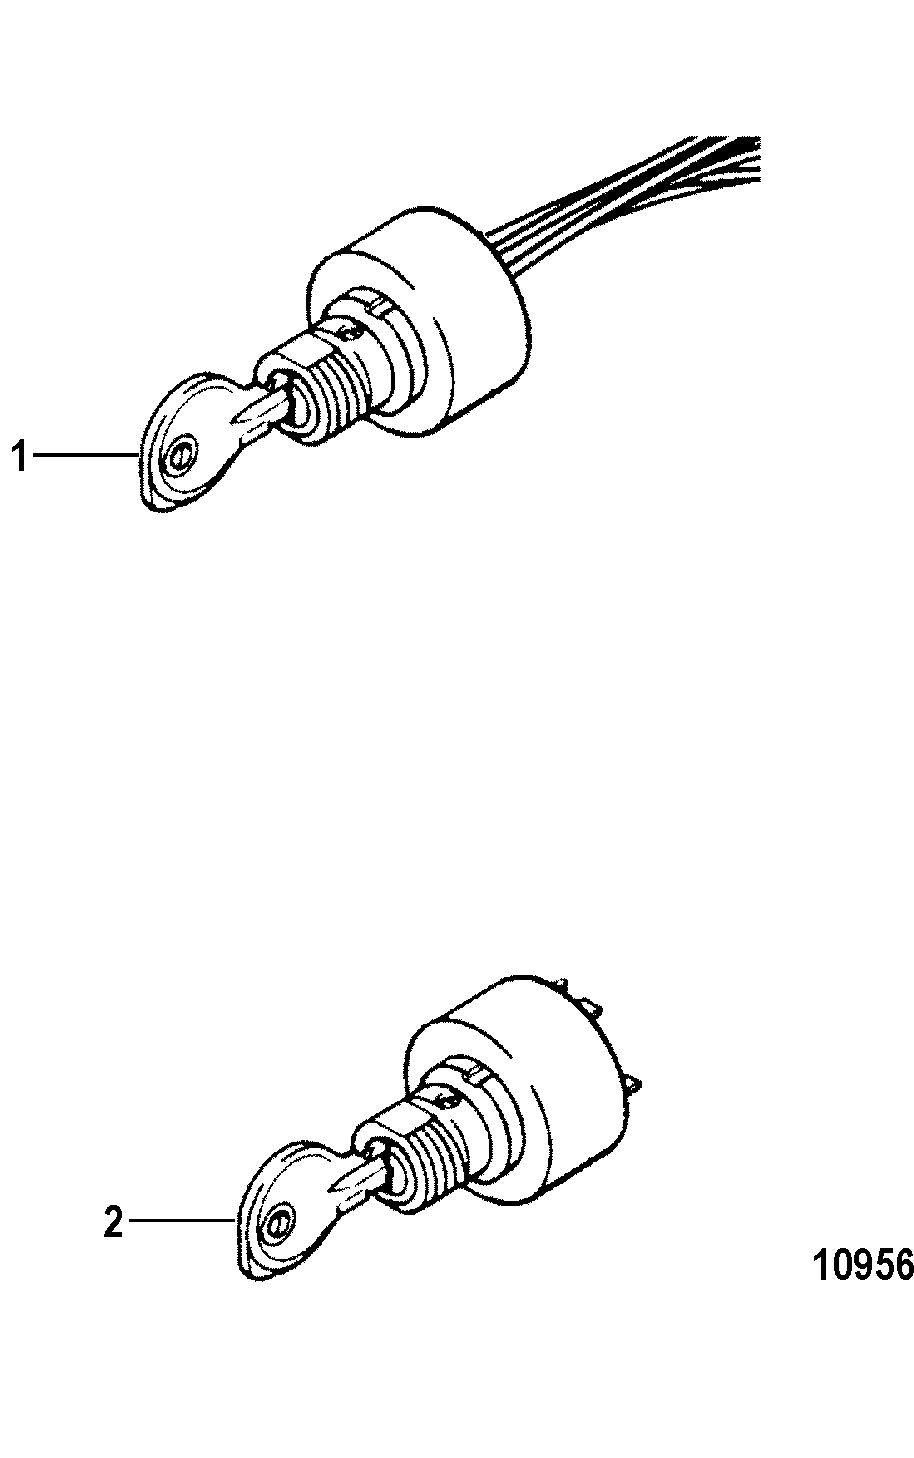 ACCESSORIES ELECTRICAL COMPONENTS AND HARNESSES Key Chart-Ignition Switch(89491 and  30431 Series)